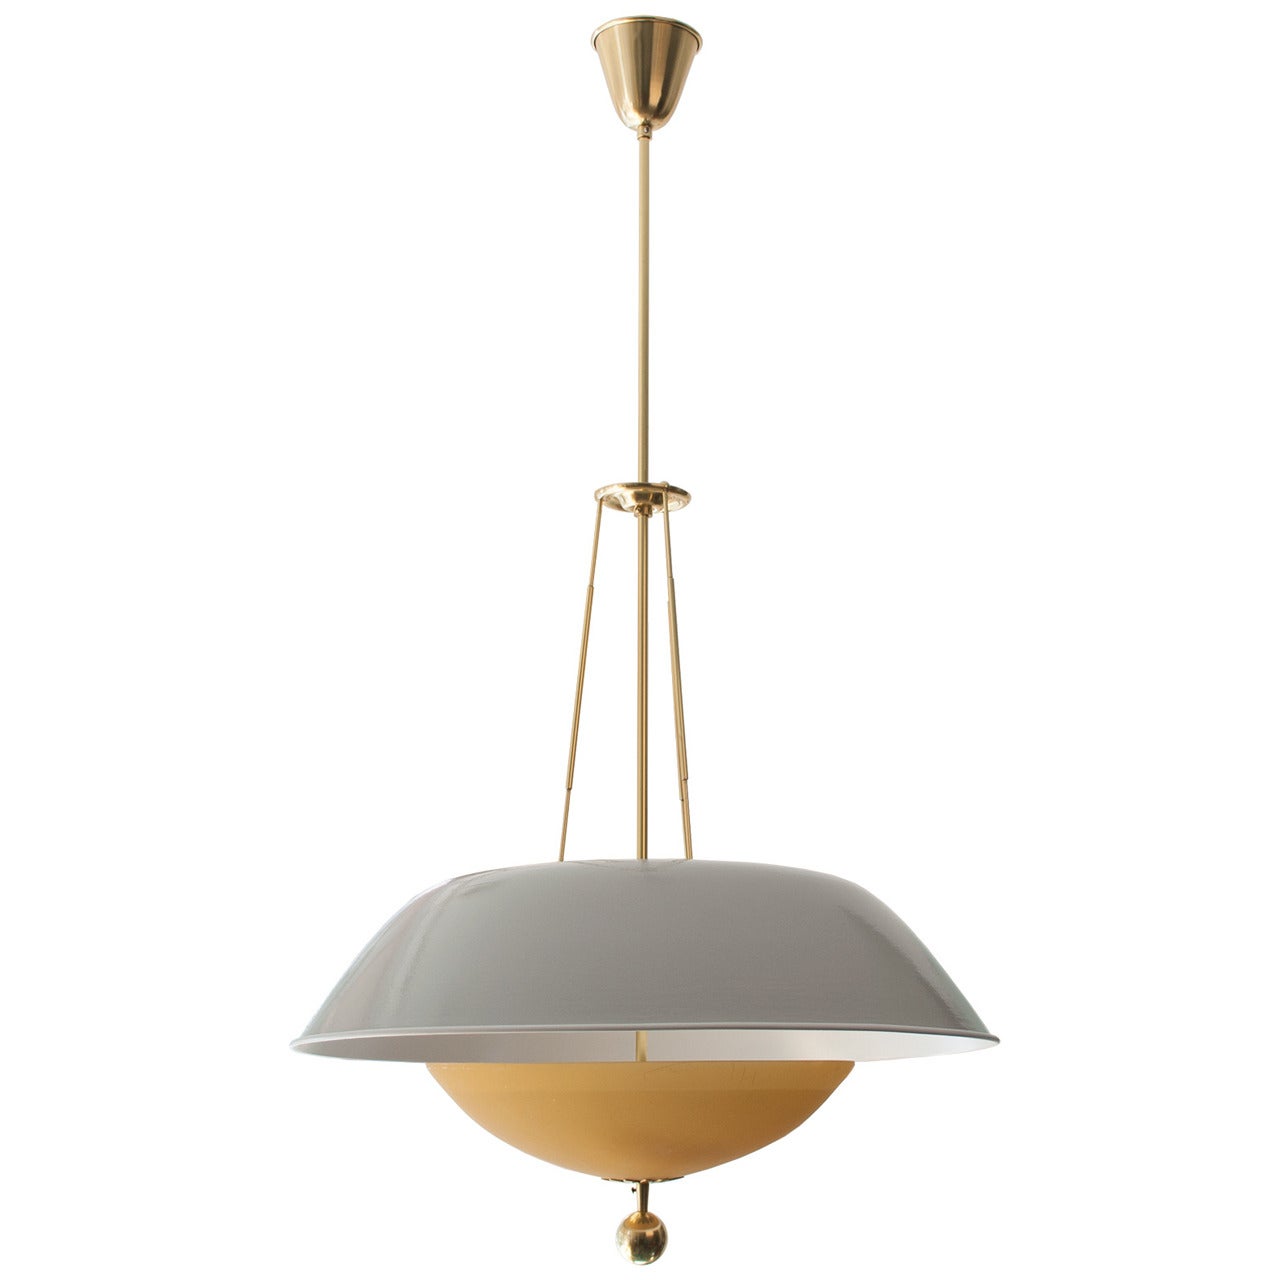 Scandinavian Mid-Century Modern Pendant with Lacquered Metal and Glass Shade